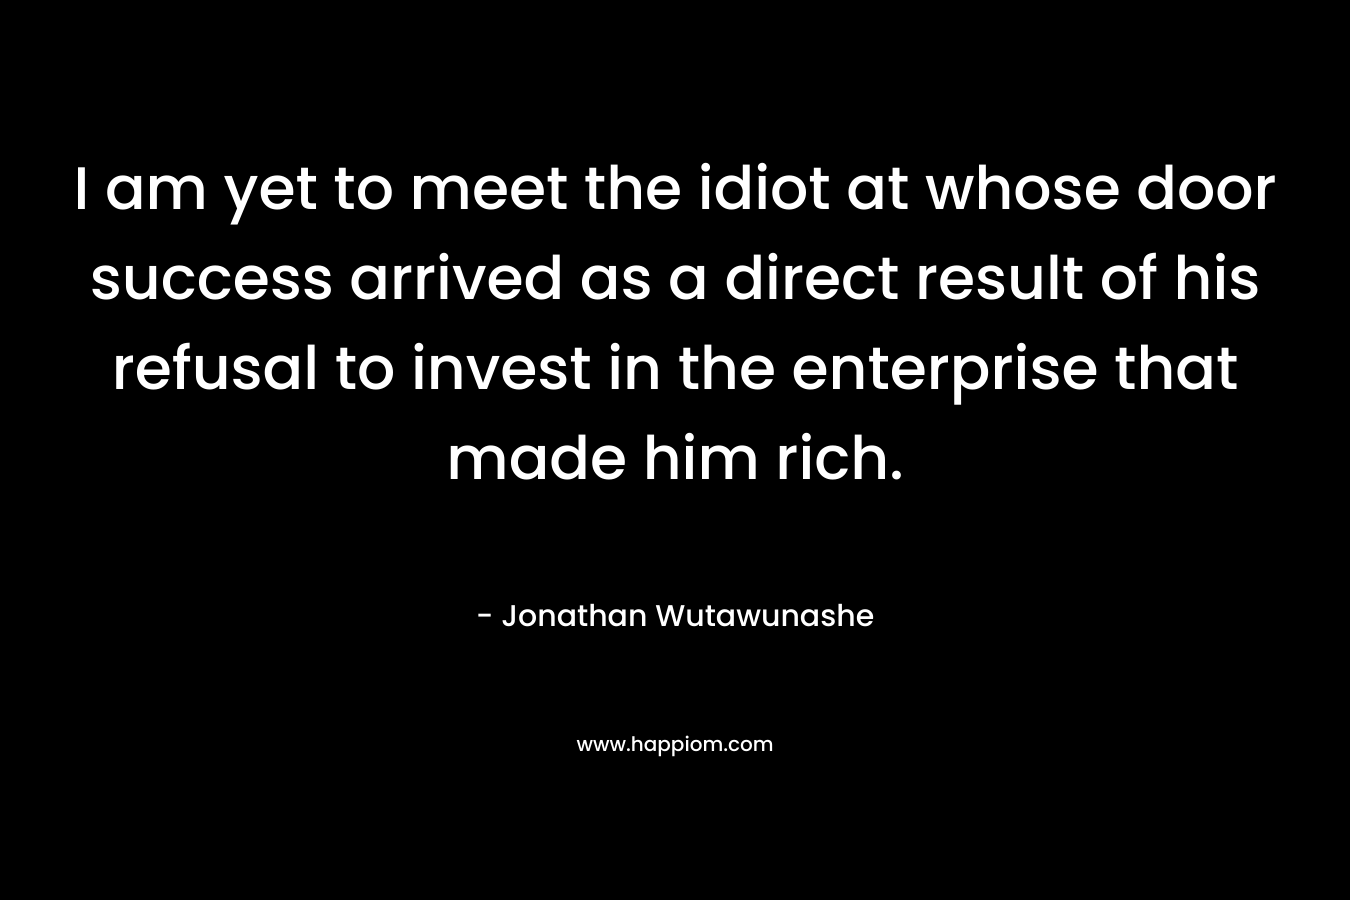 I am yet to meet the idiot at whose door success arrived as a direct result of his refusal to invest in the enterprise that made him rich. – Jonathan Wutawunashe